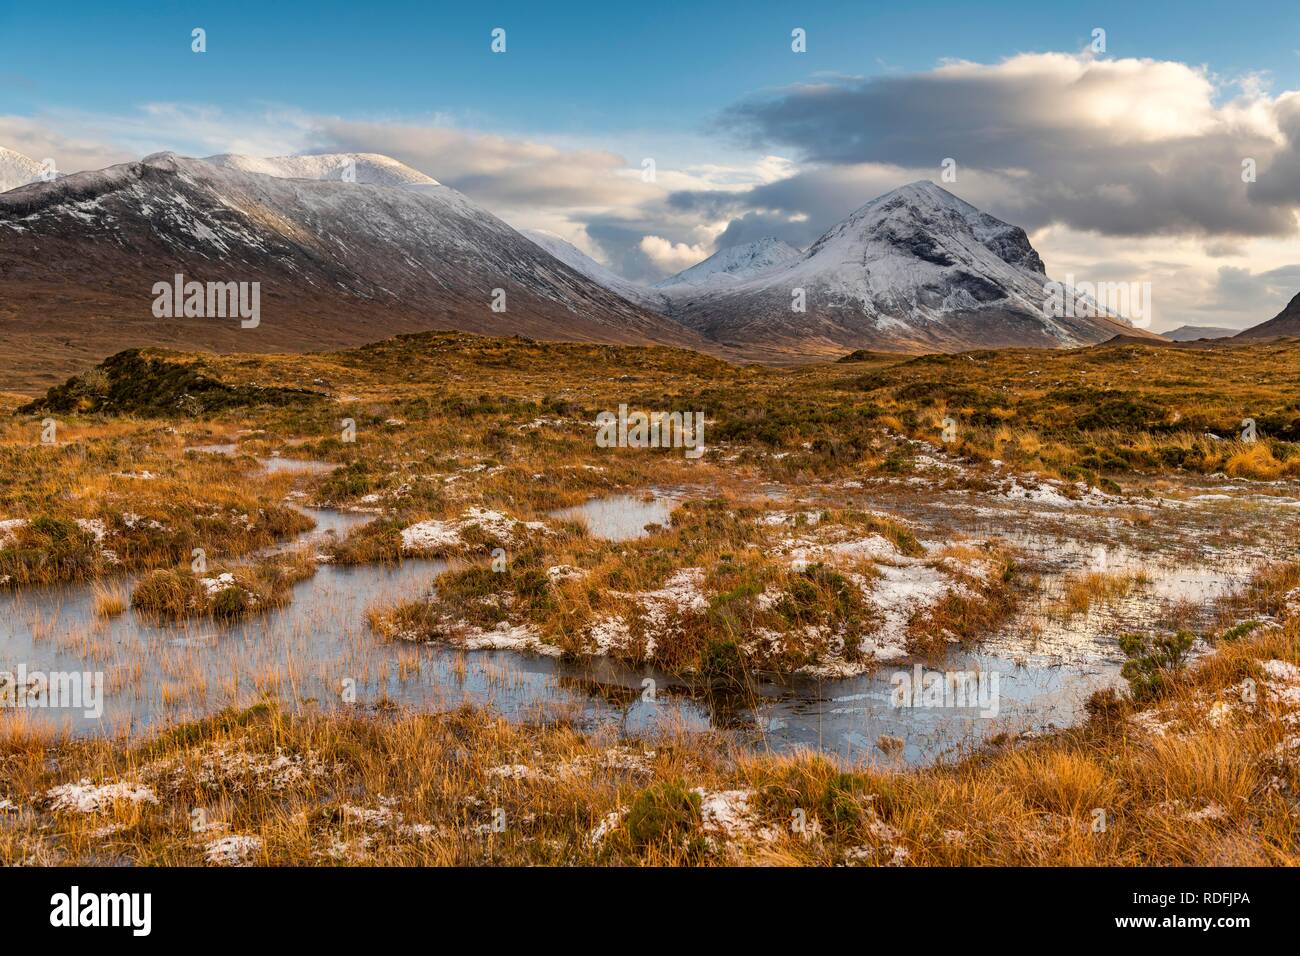 Moor landscape with snow-covered peaks of the Cullins Mountains in Highland Landscape, Sligachan, Portree, Isle of Sky, Scotland Stock Photo